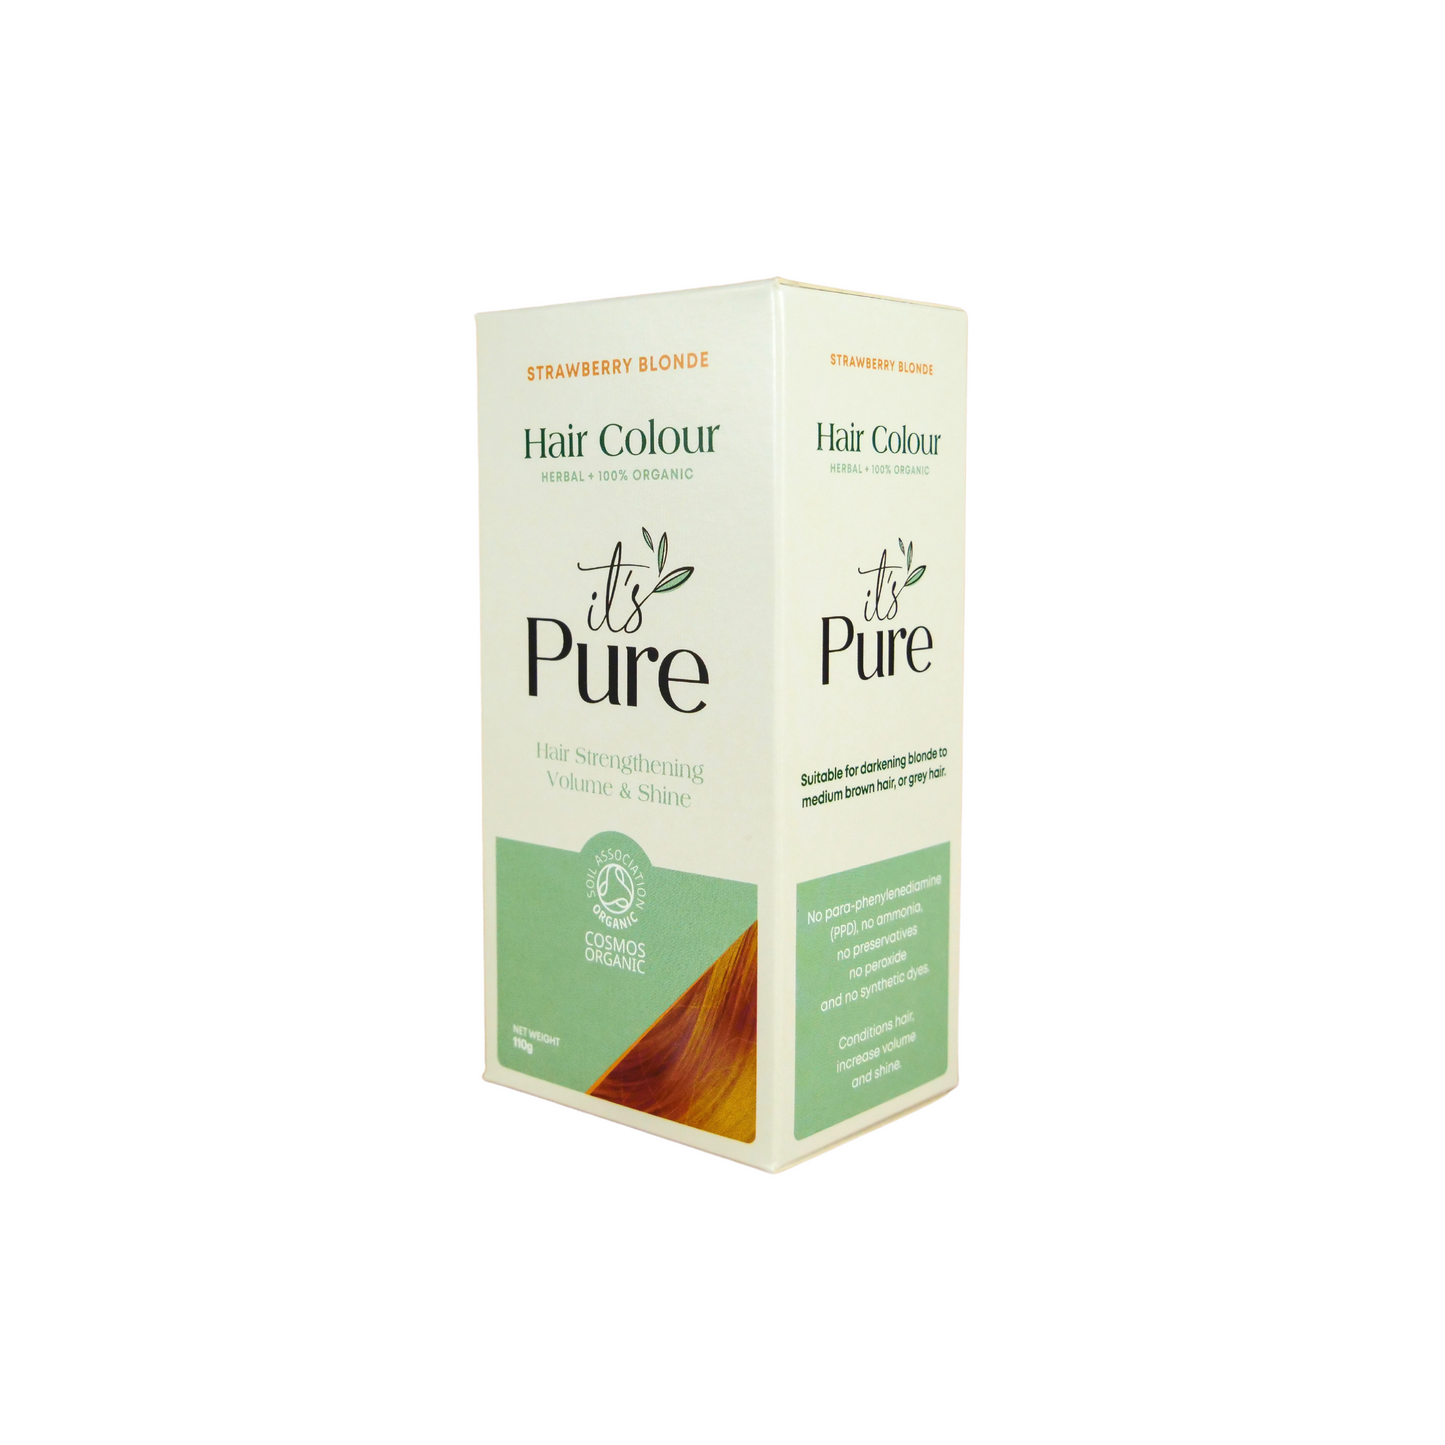 it's pure strawberry blonde semi permanent natural hair dye in light green and green box on white background